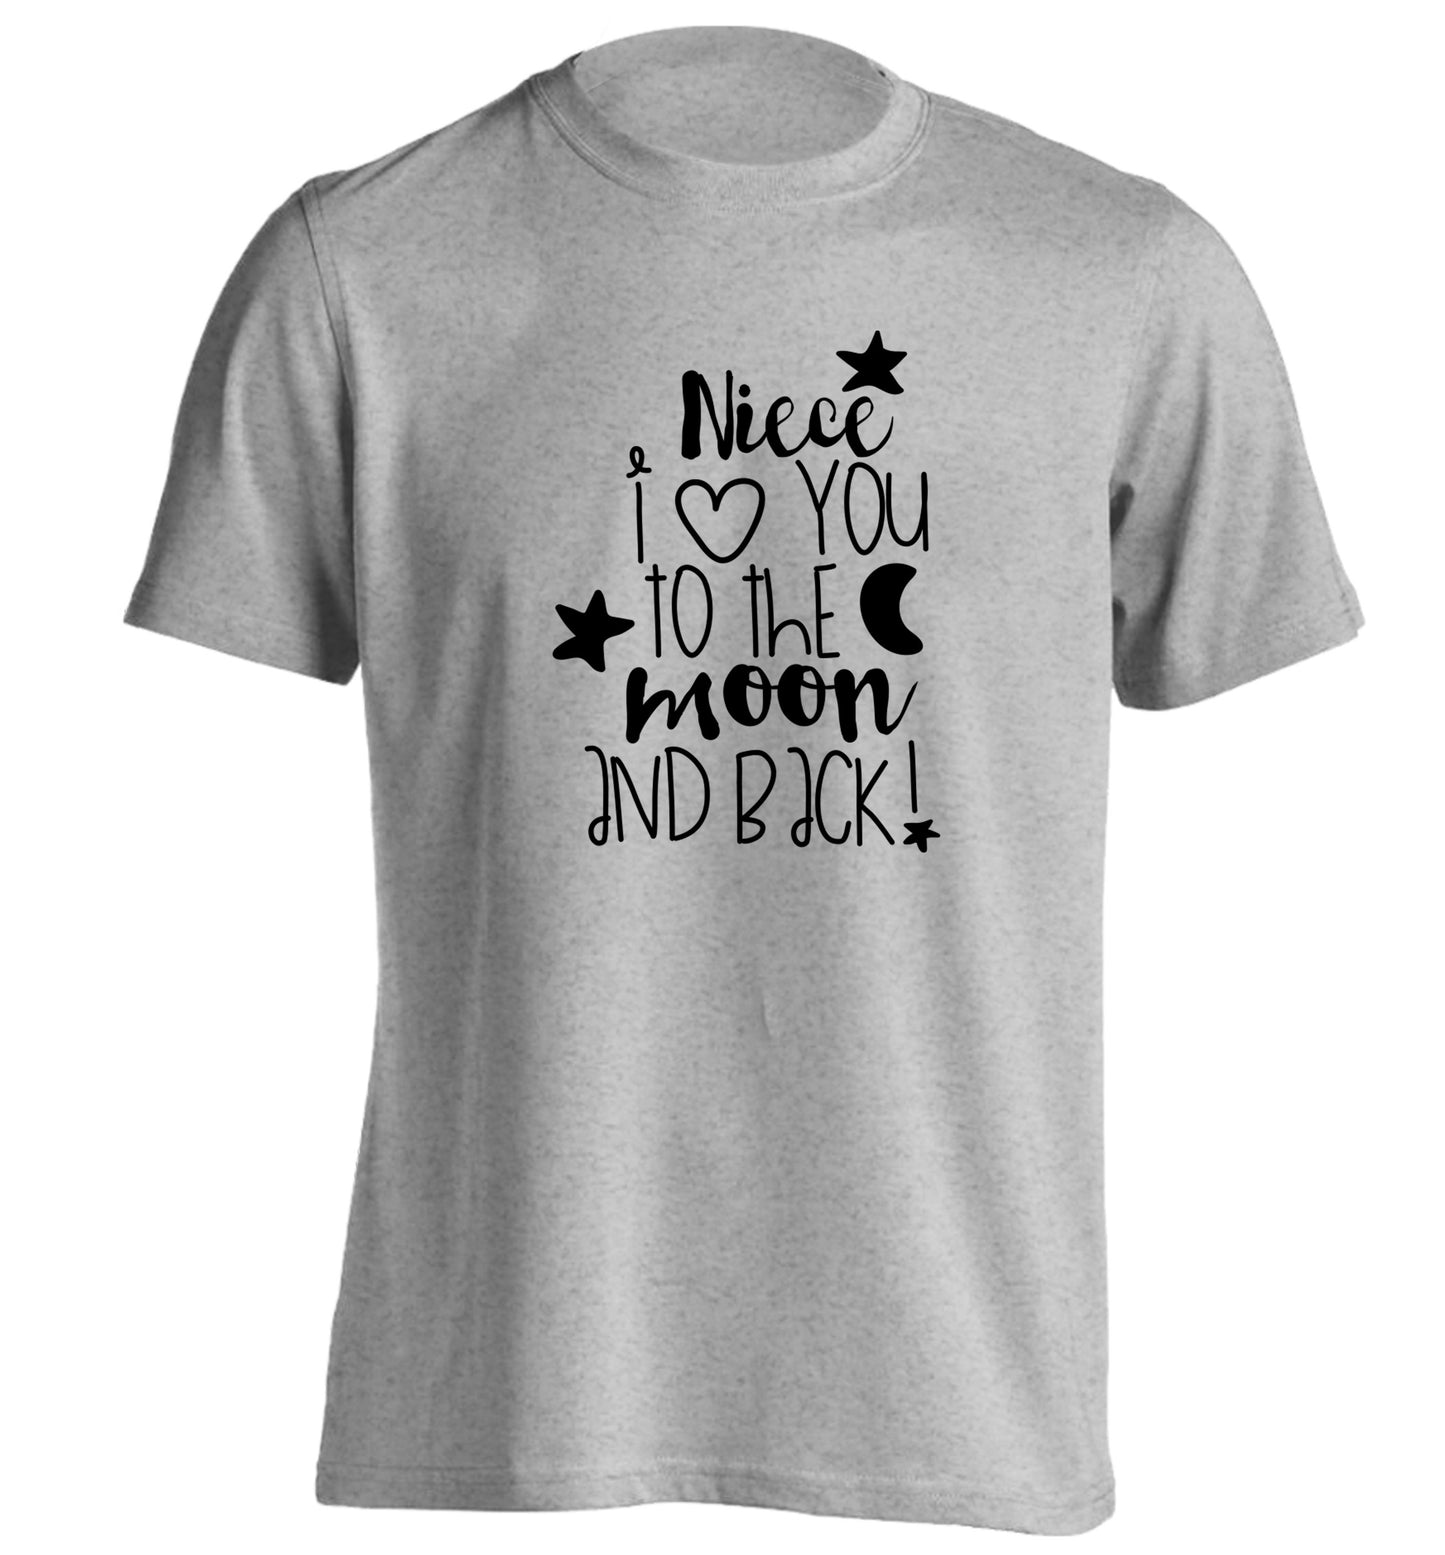 Niece I love you to the moon and back adults unisex grey Tshirt 2XL